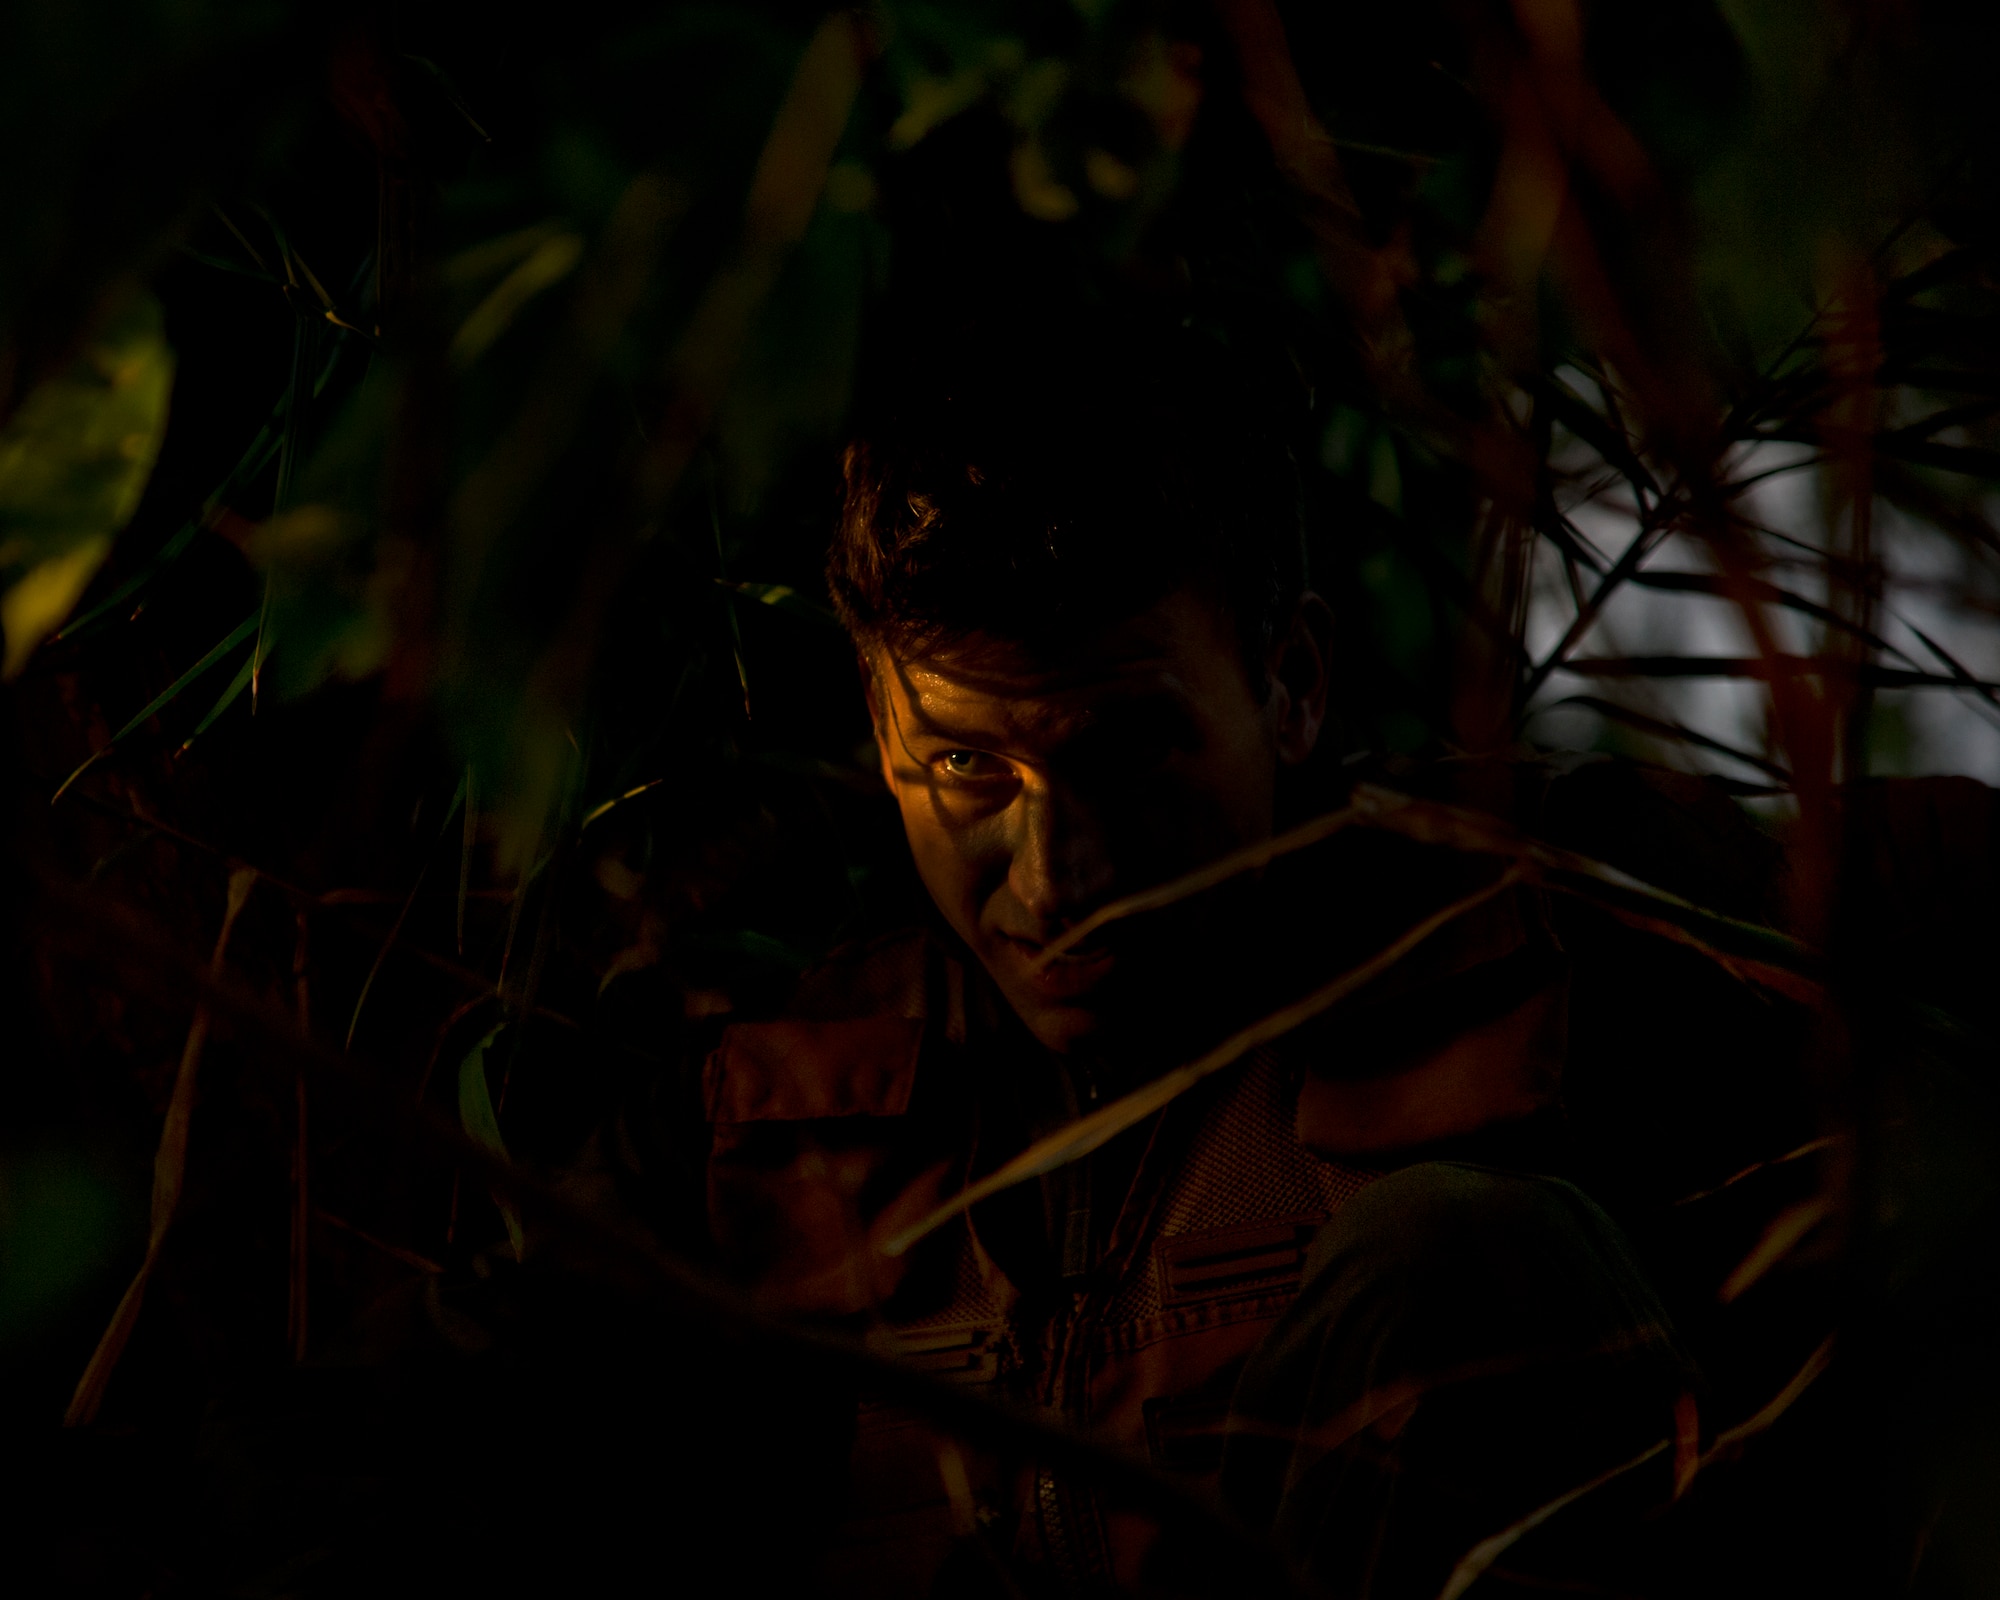 Maj. Dan Allen, a pilot evaluator for the 96th Air Refueling Squadron, takes cover in the brush during combat survival training on Joint Base Pearl Harbor-Hickam, Hawaii, March 26, 2015. Allen led a team of four during four hours of training that is designed to simulate the aircrew going down in a hostile environment. The aircrew uses teamwork to conceal their location, evade opposition forces, and practice proper recovery procedures. (U.S. Air Force photo by Tech. Sgt. Aaron Oelrich/Released)